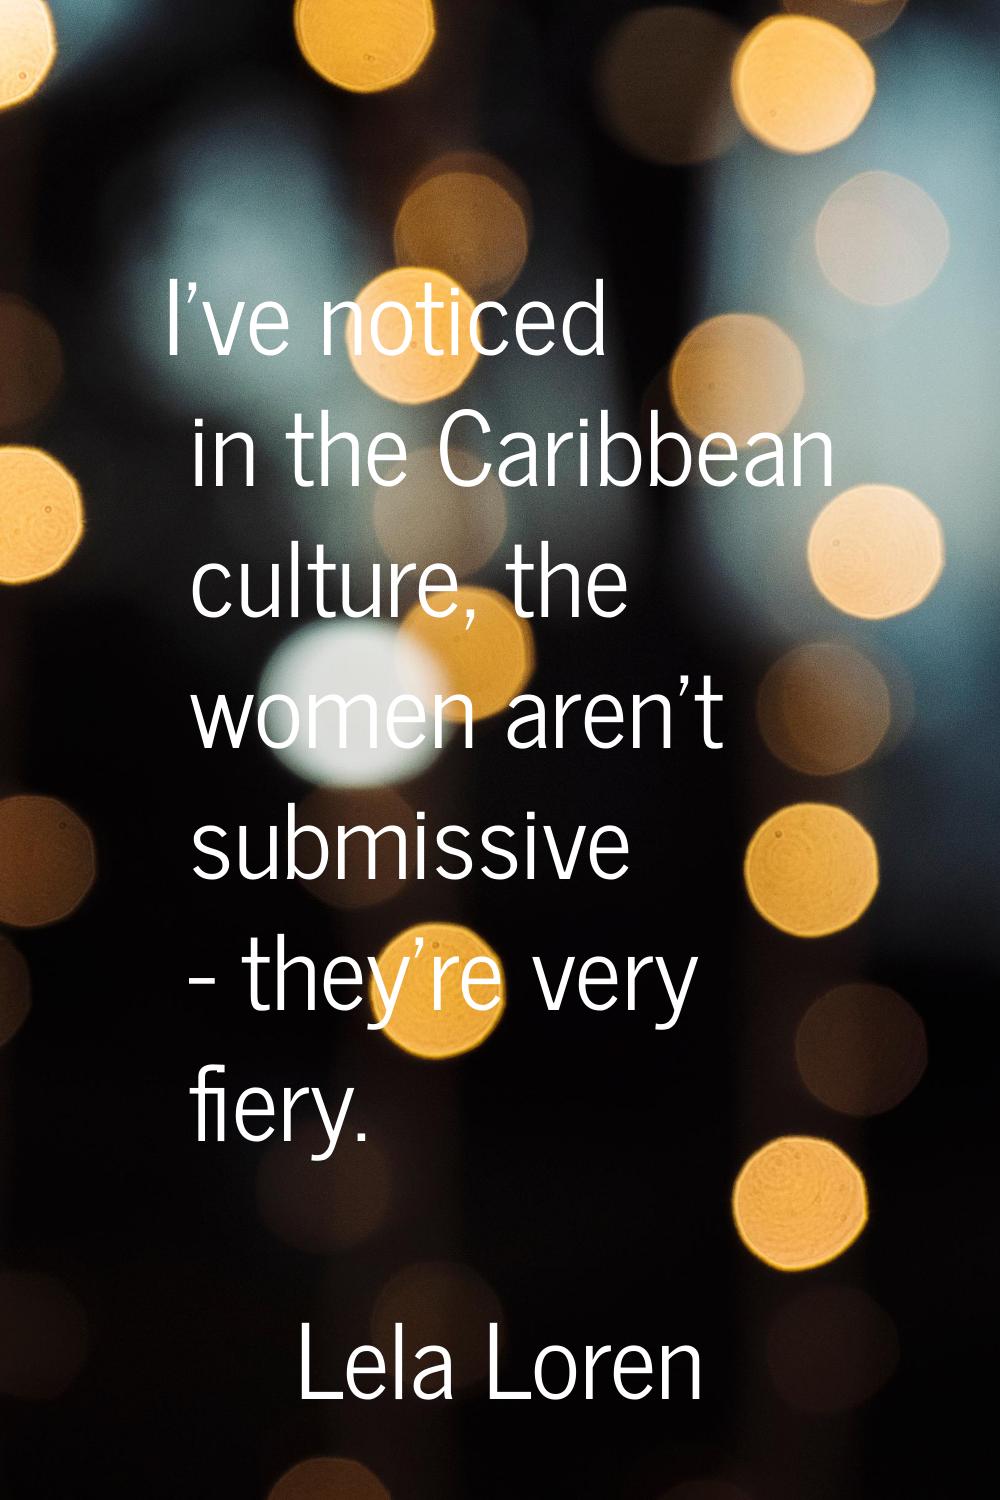 I've noticed in the Caribbean culture, the women aren't submissive - they're very fiery.